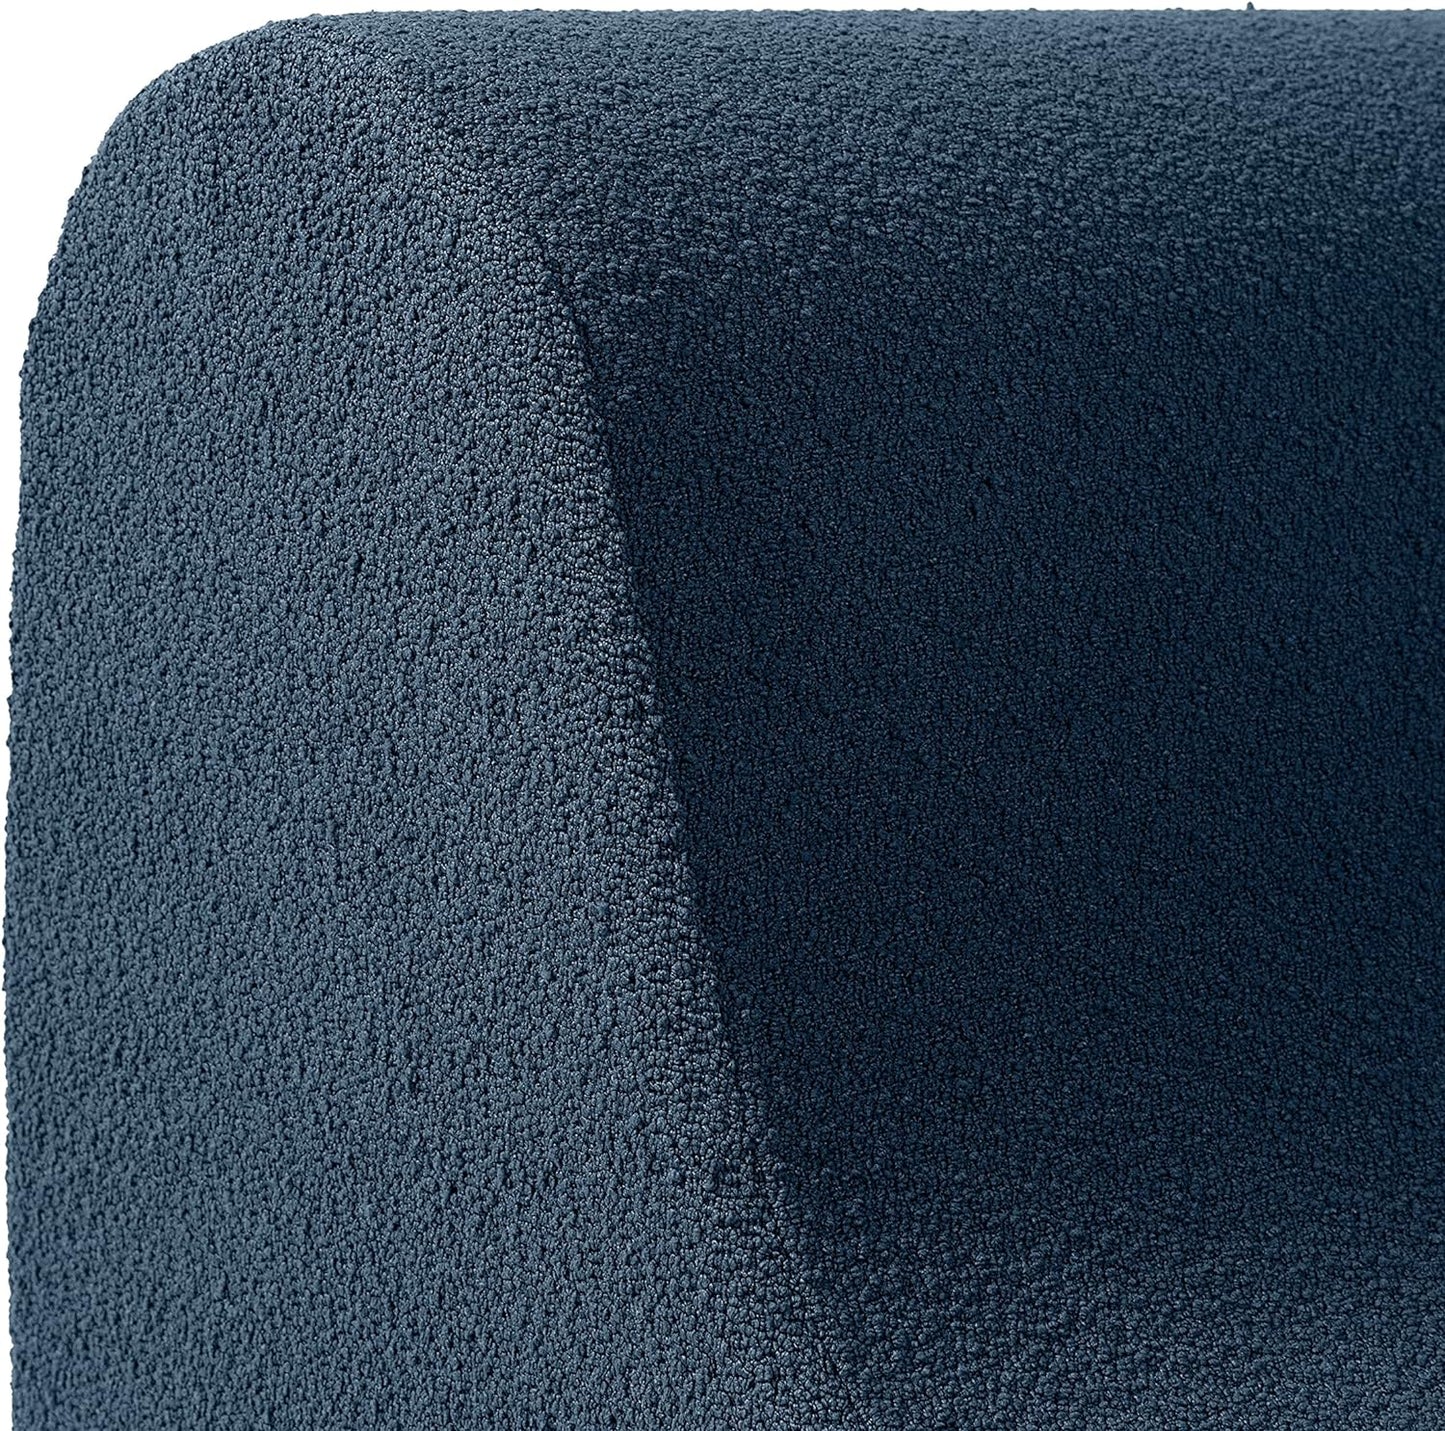 Uptown Modern Armless Accent Chair, Boucle Navy